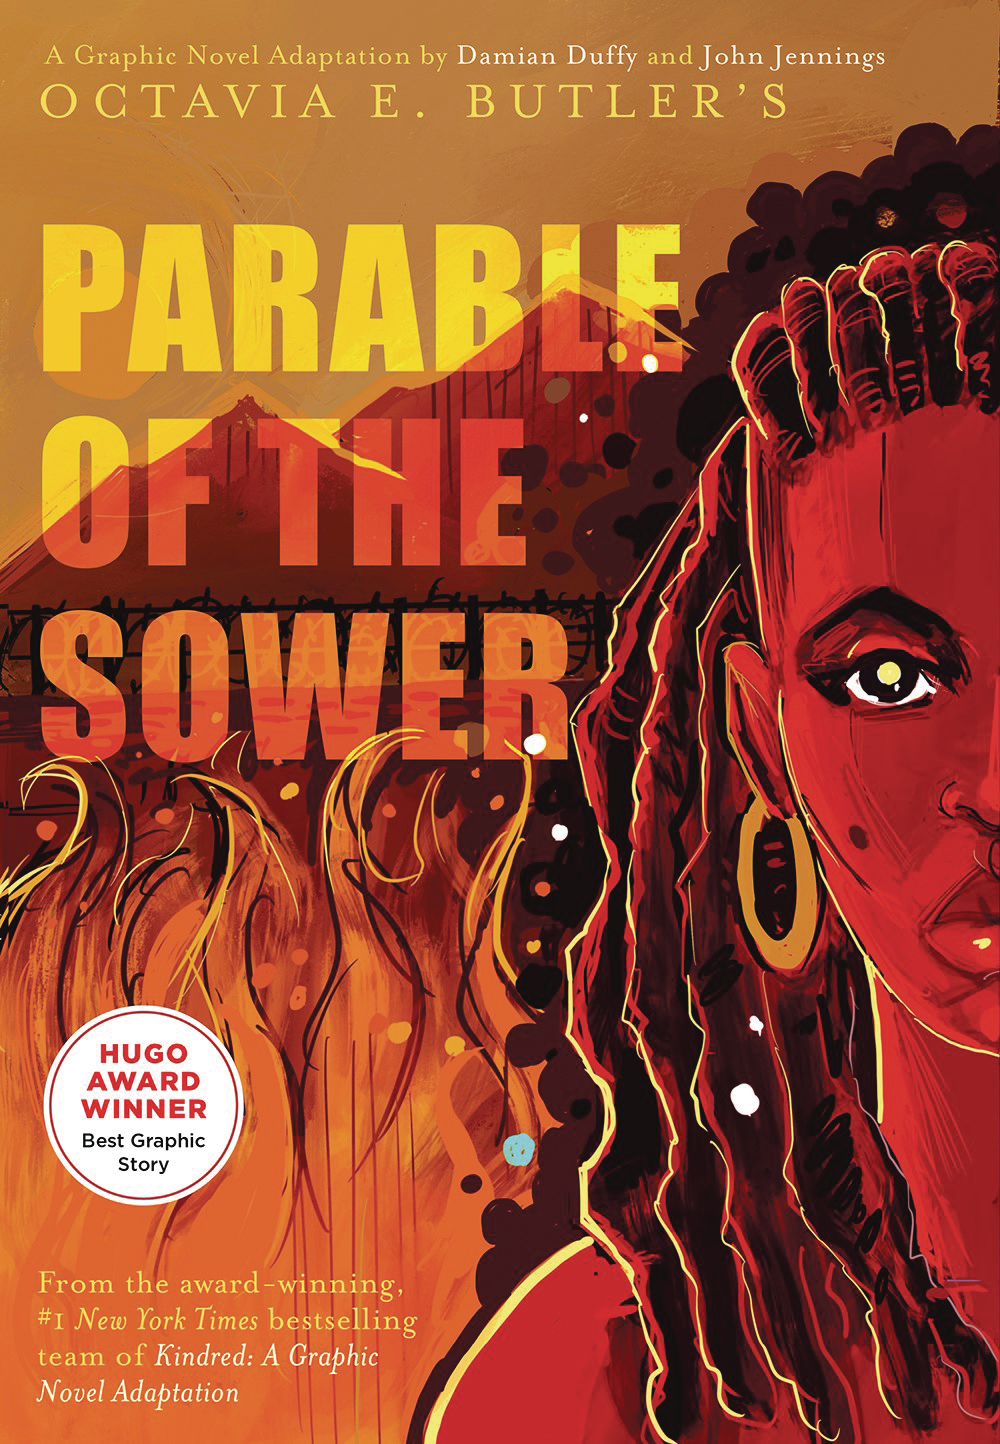 Octavia Butler Parable of the Sower Graphic Novel